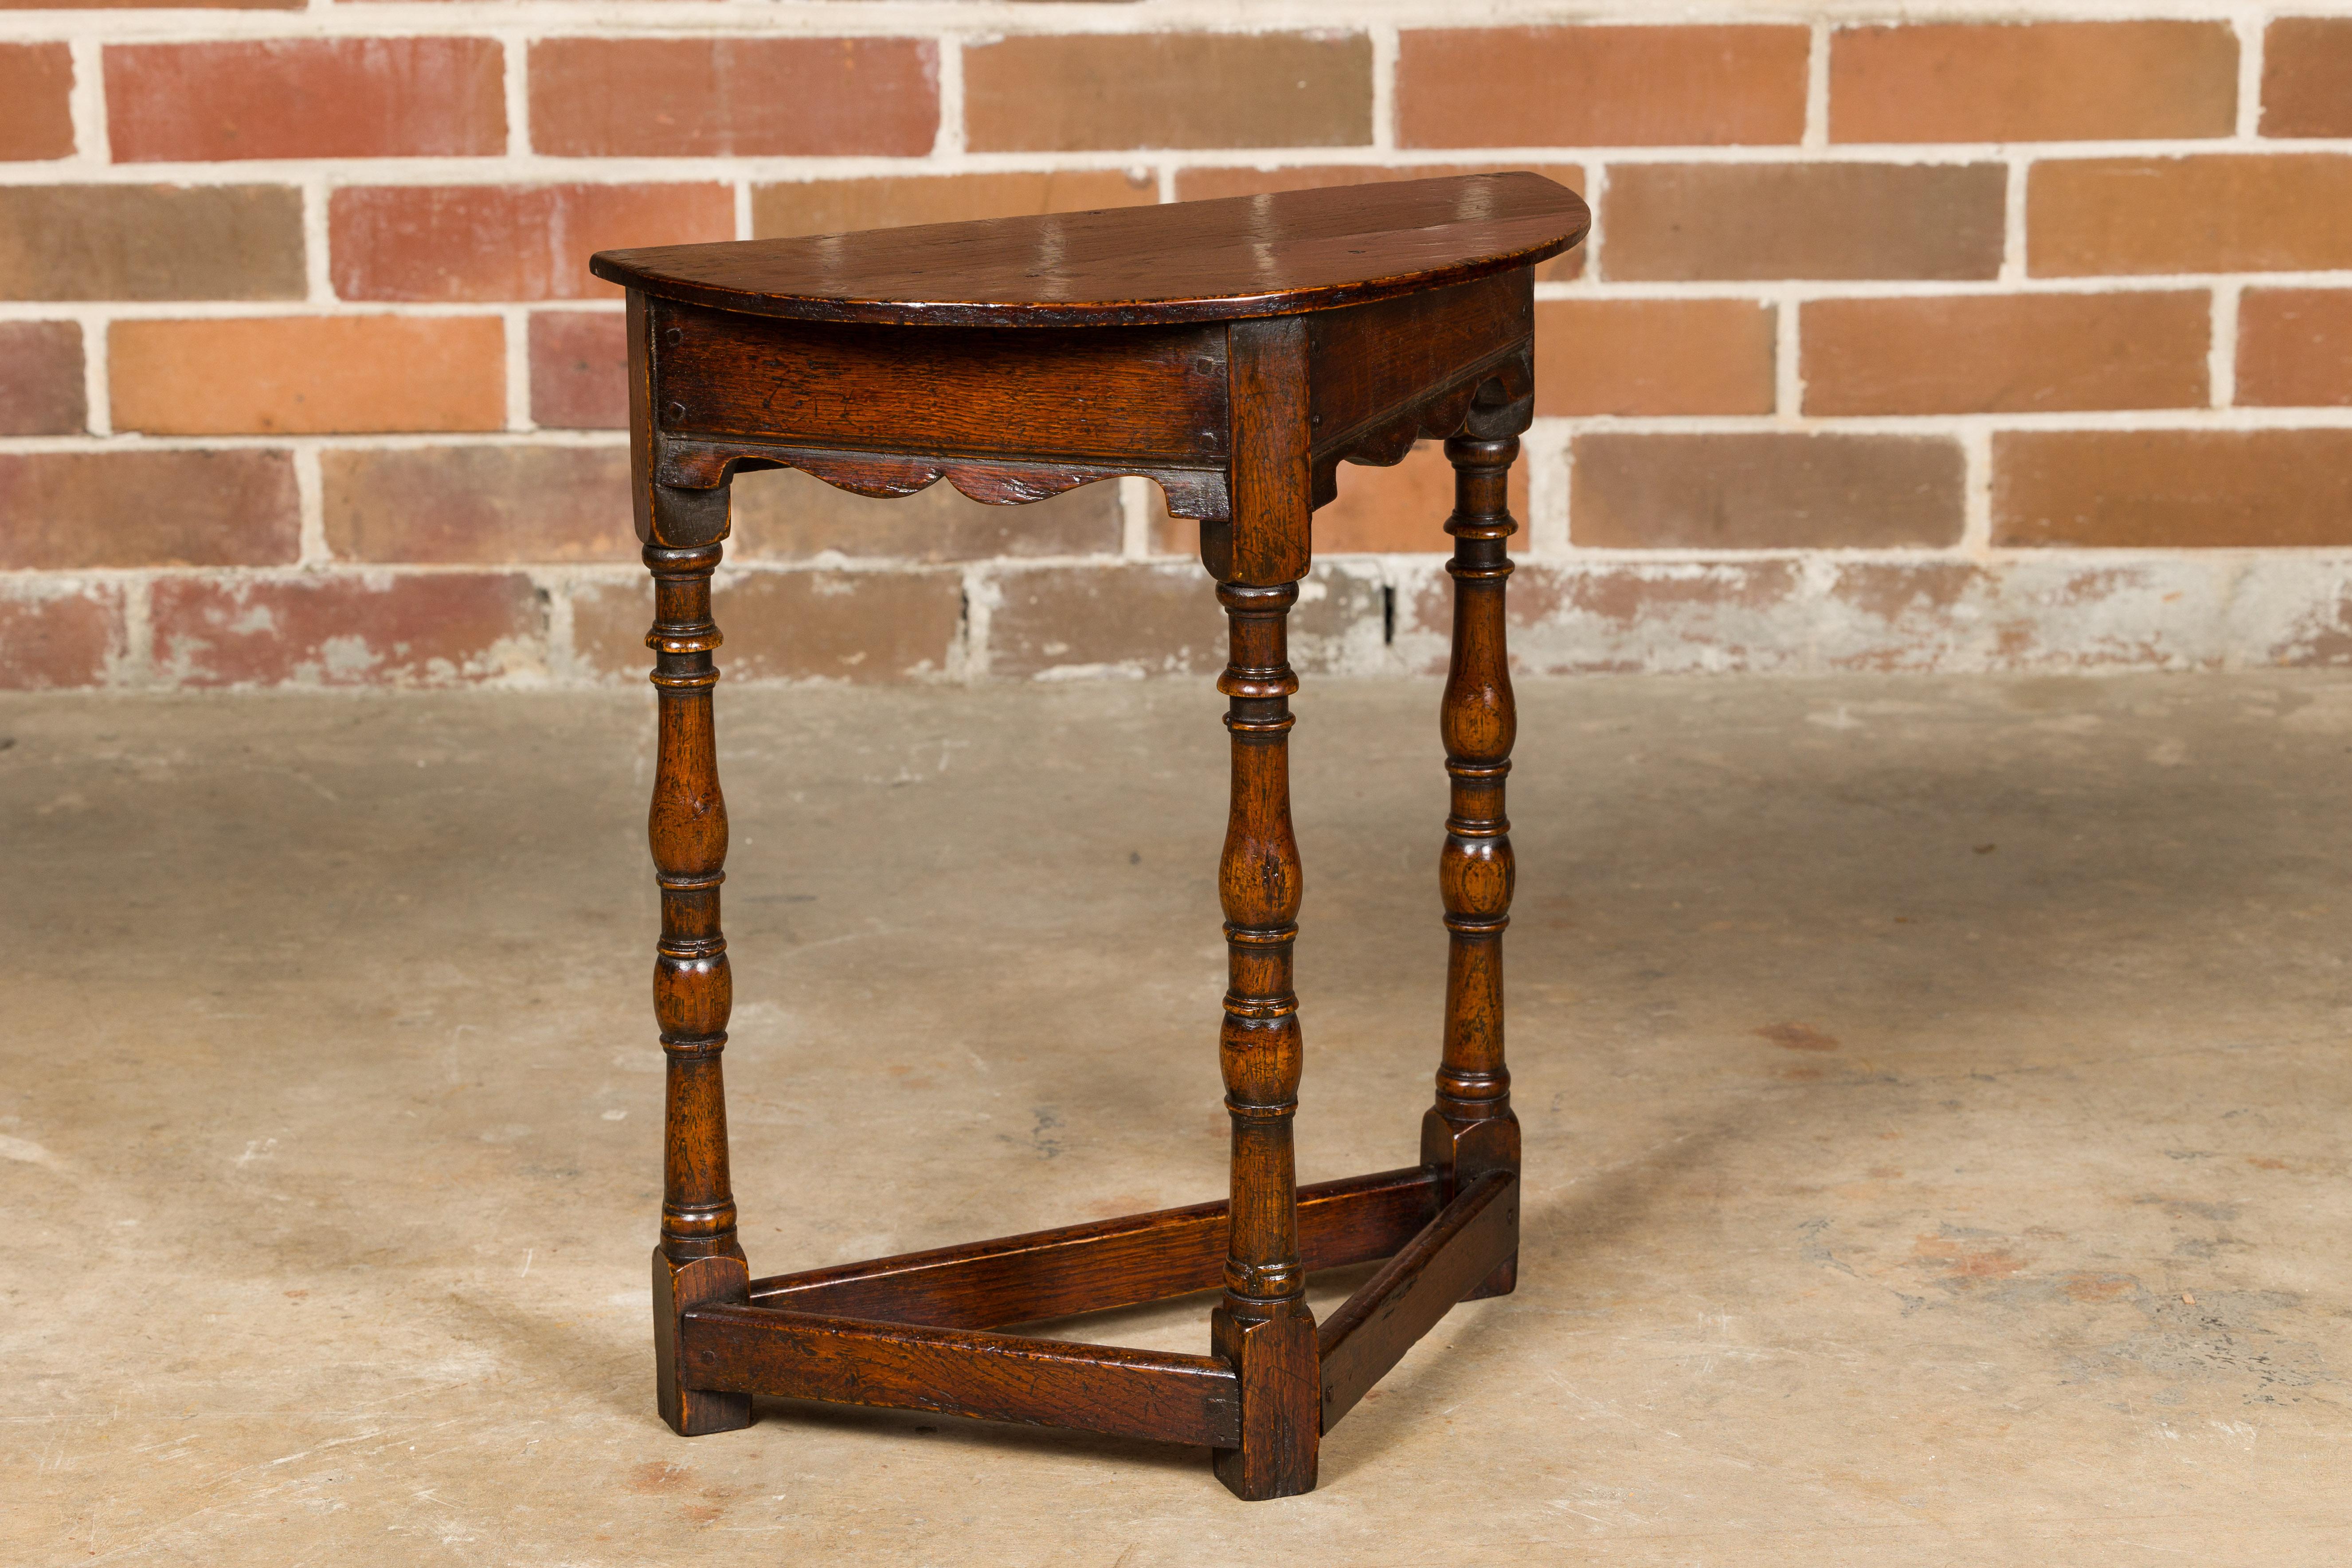 English 19th Century Small Oak Demi-Lune Table with Turned Legs and Carved Apron 1